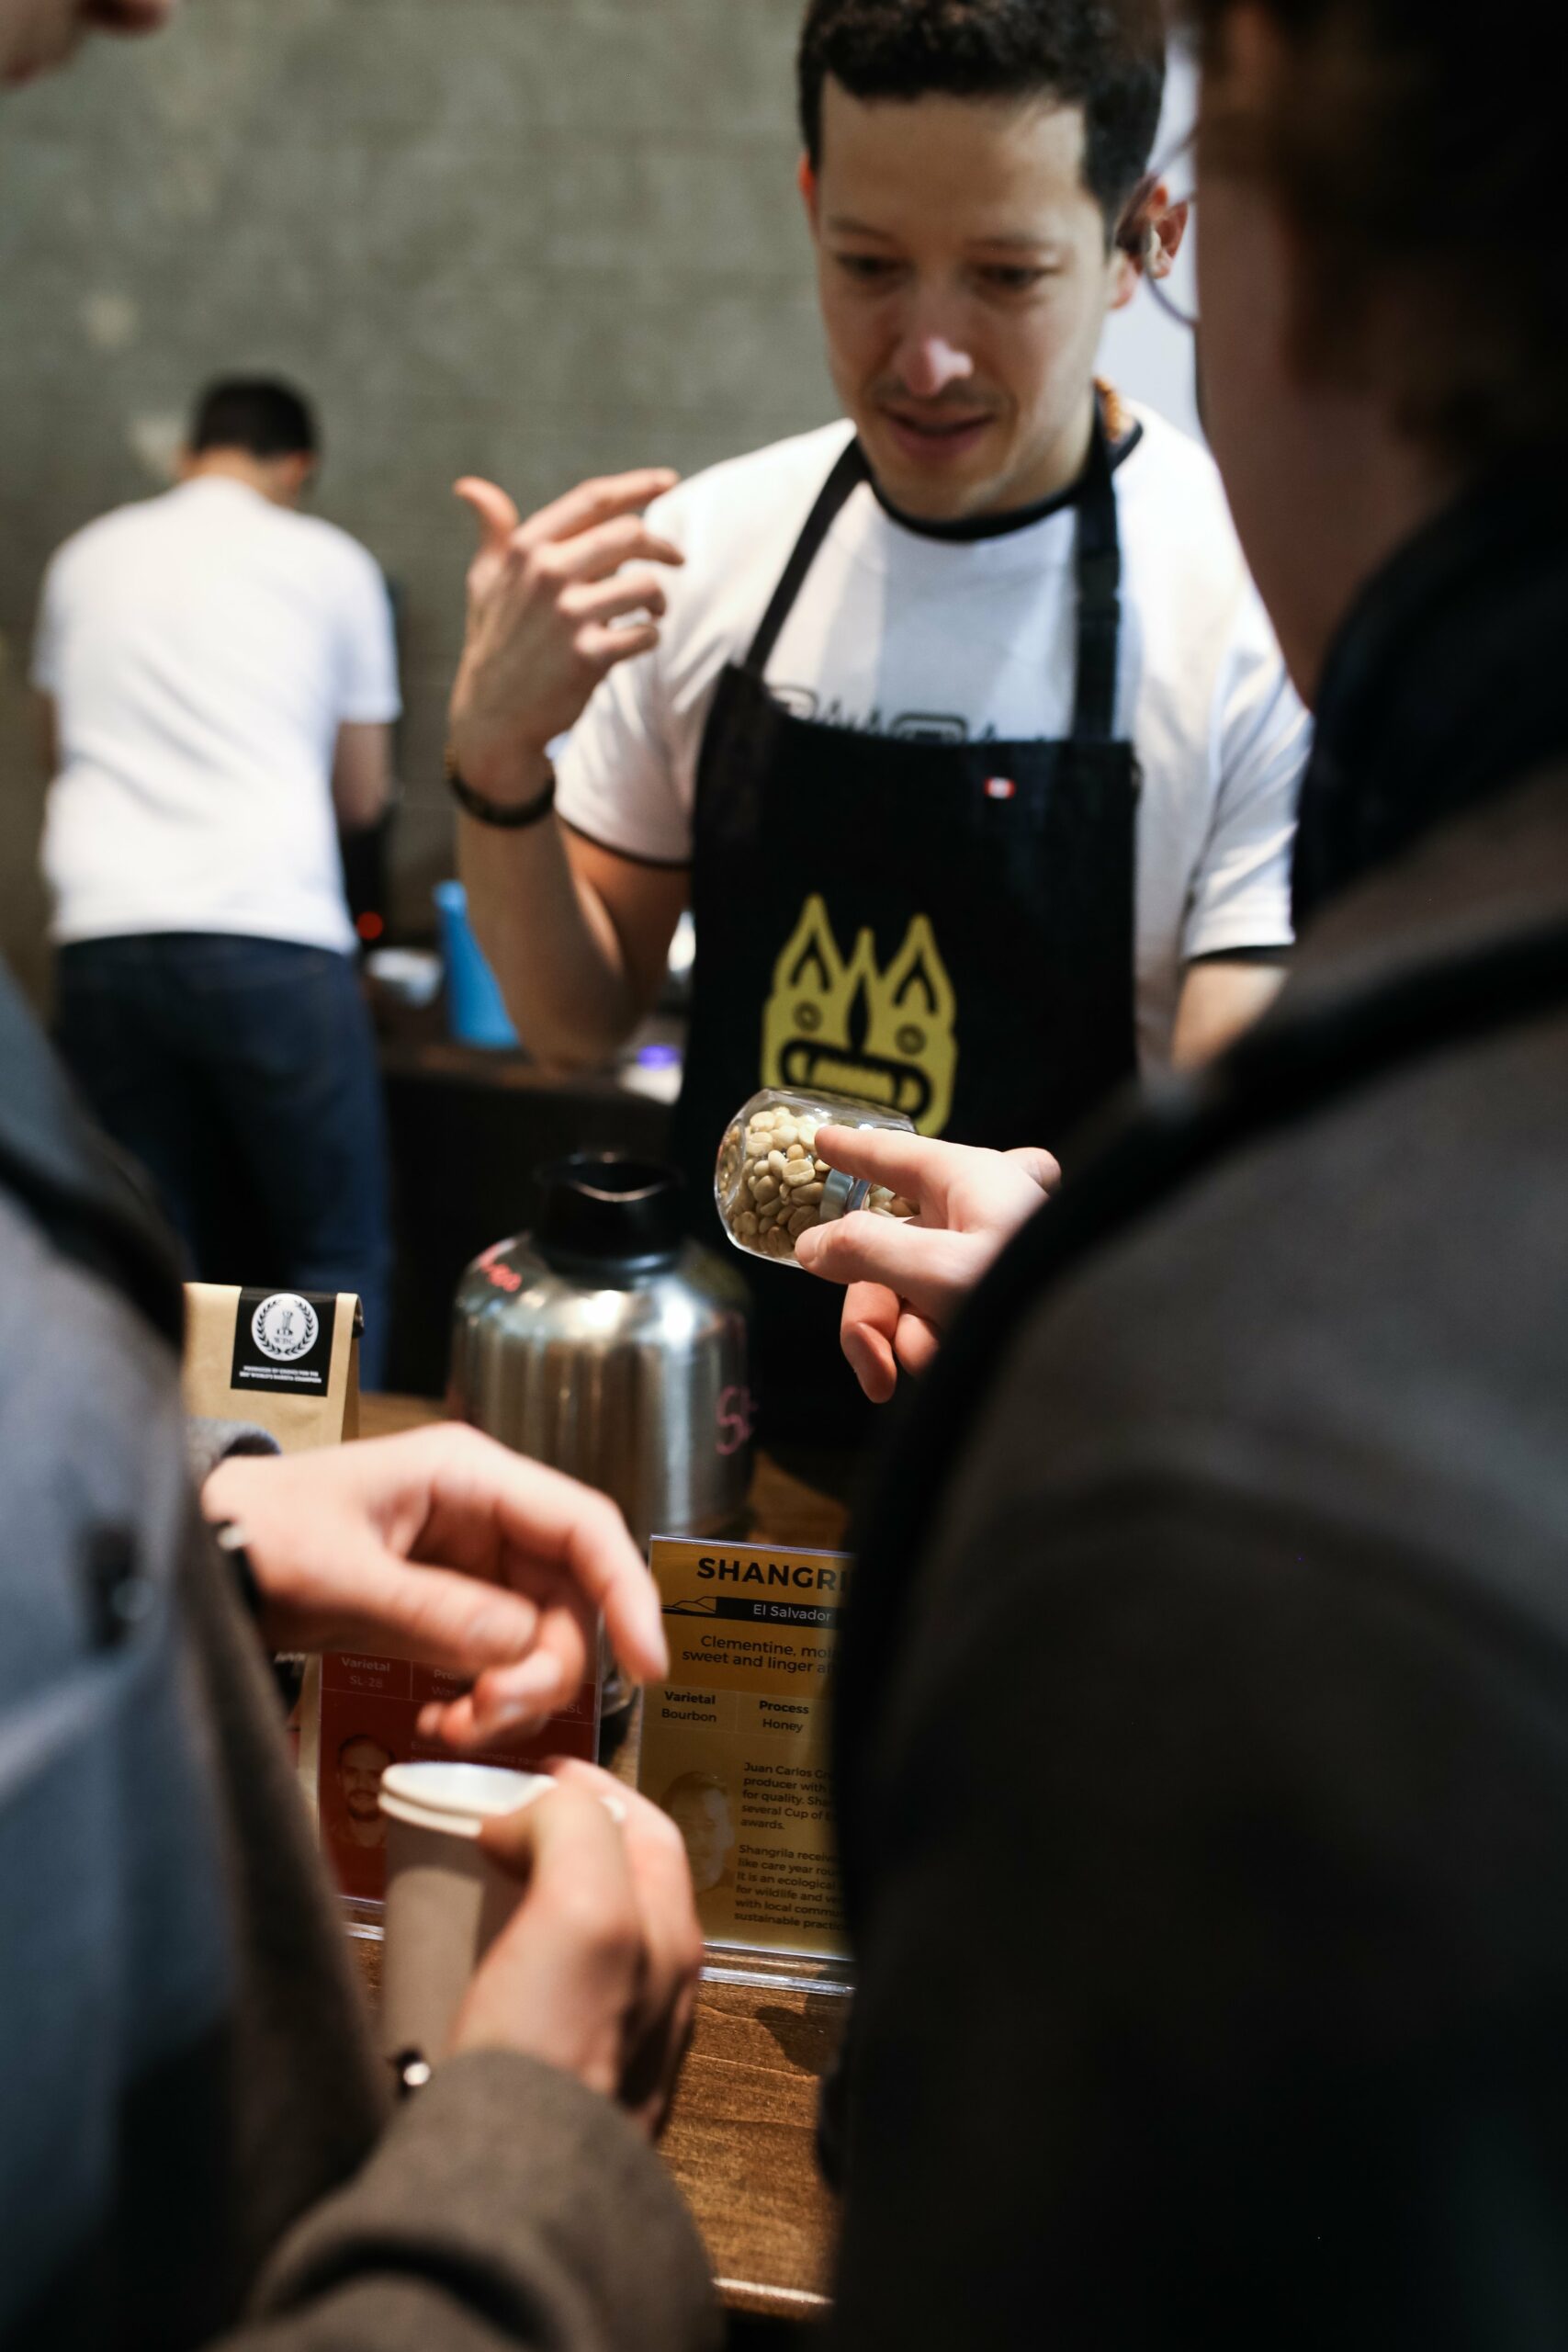 Roasters took time to share their coffee and roasting knowledge